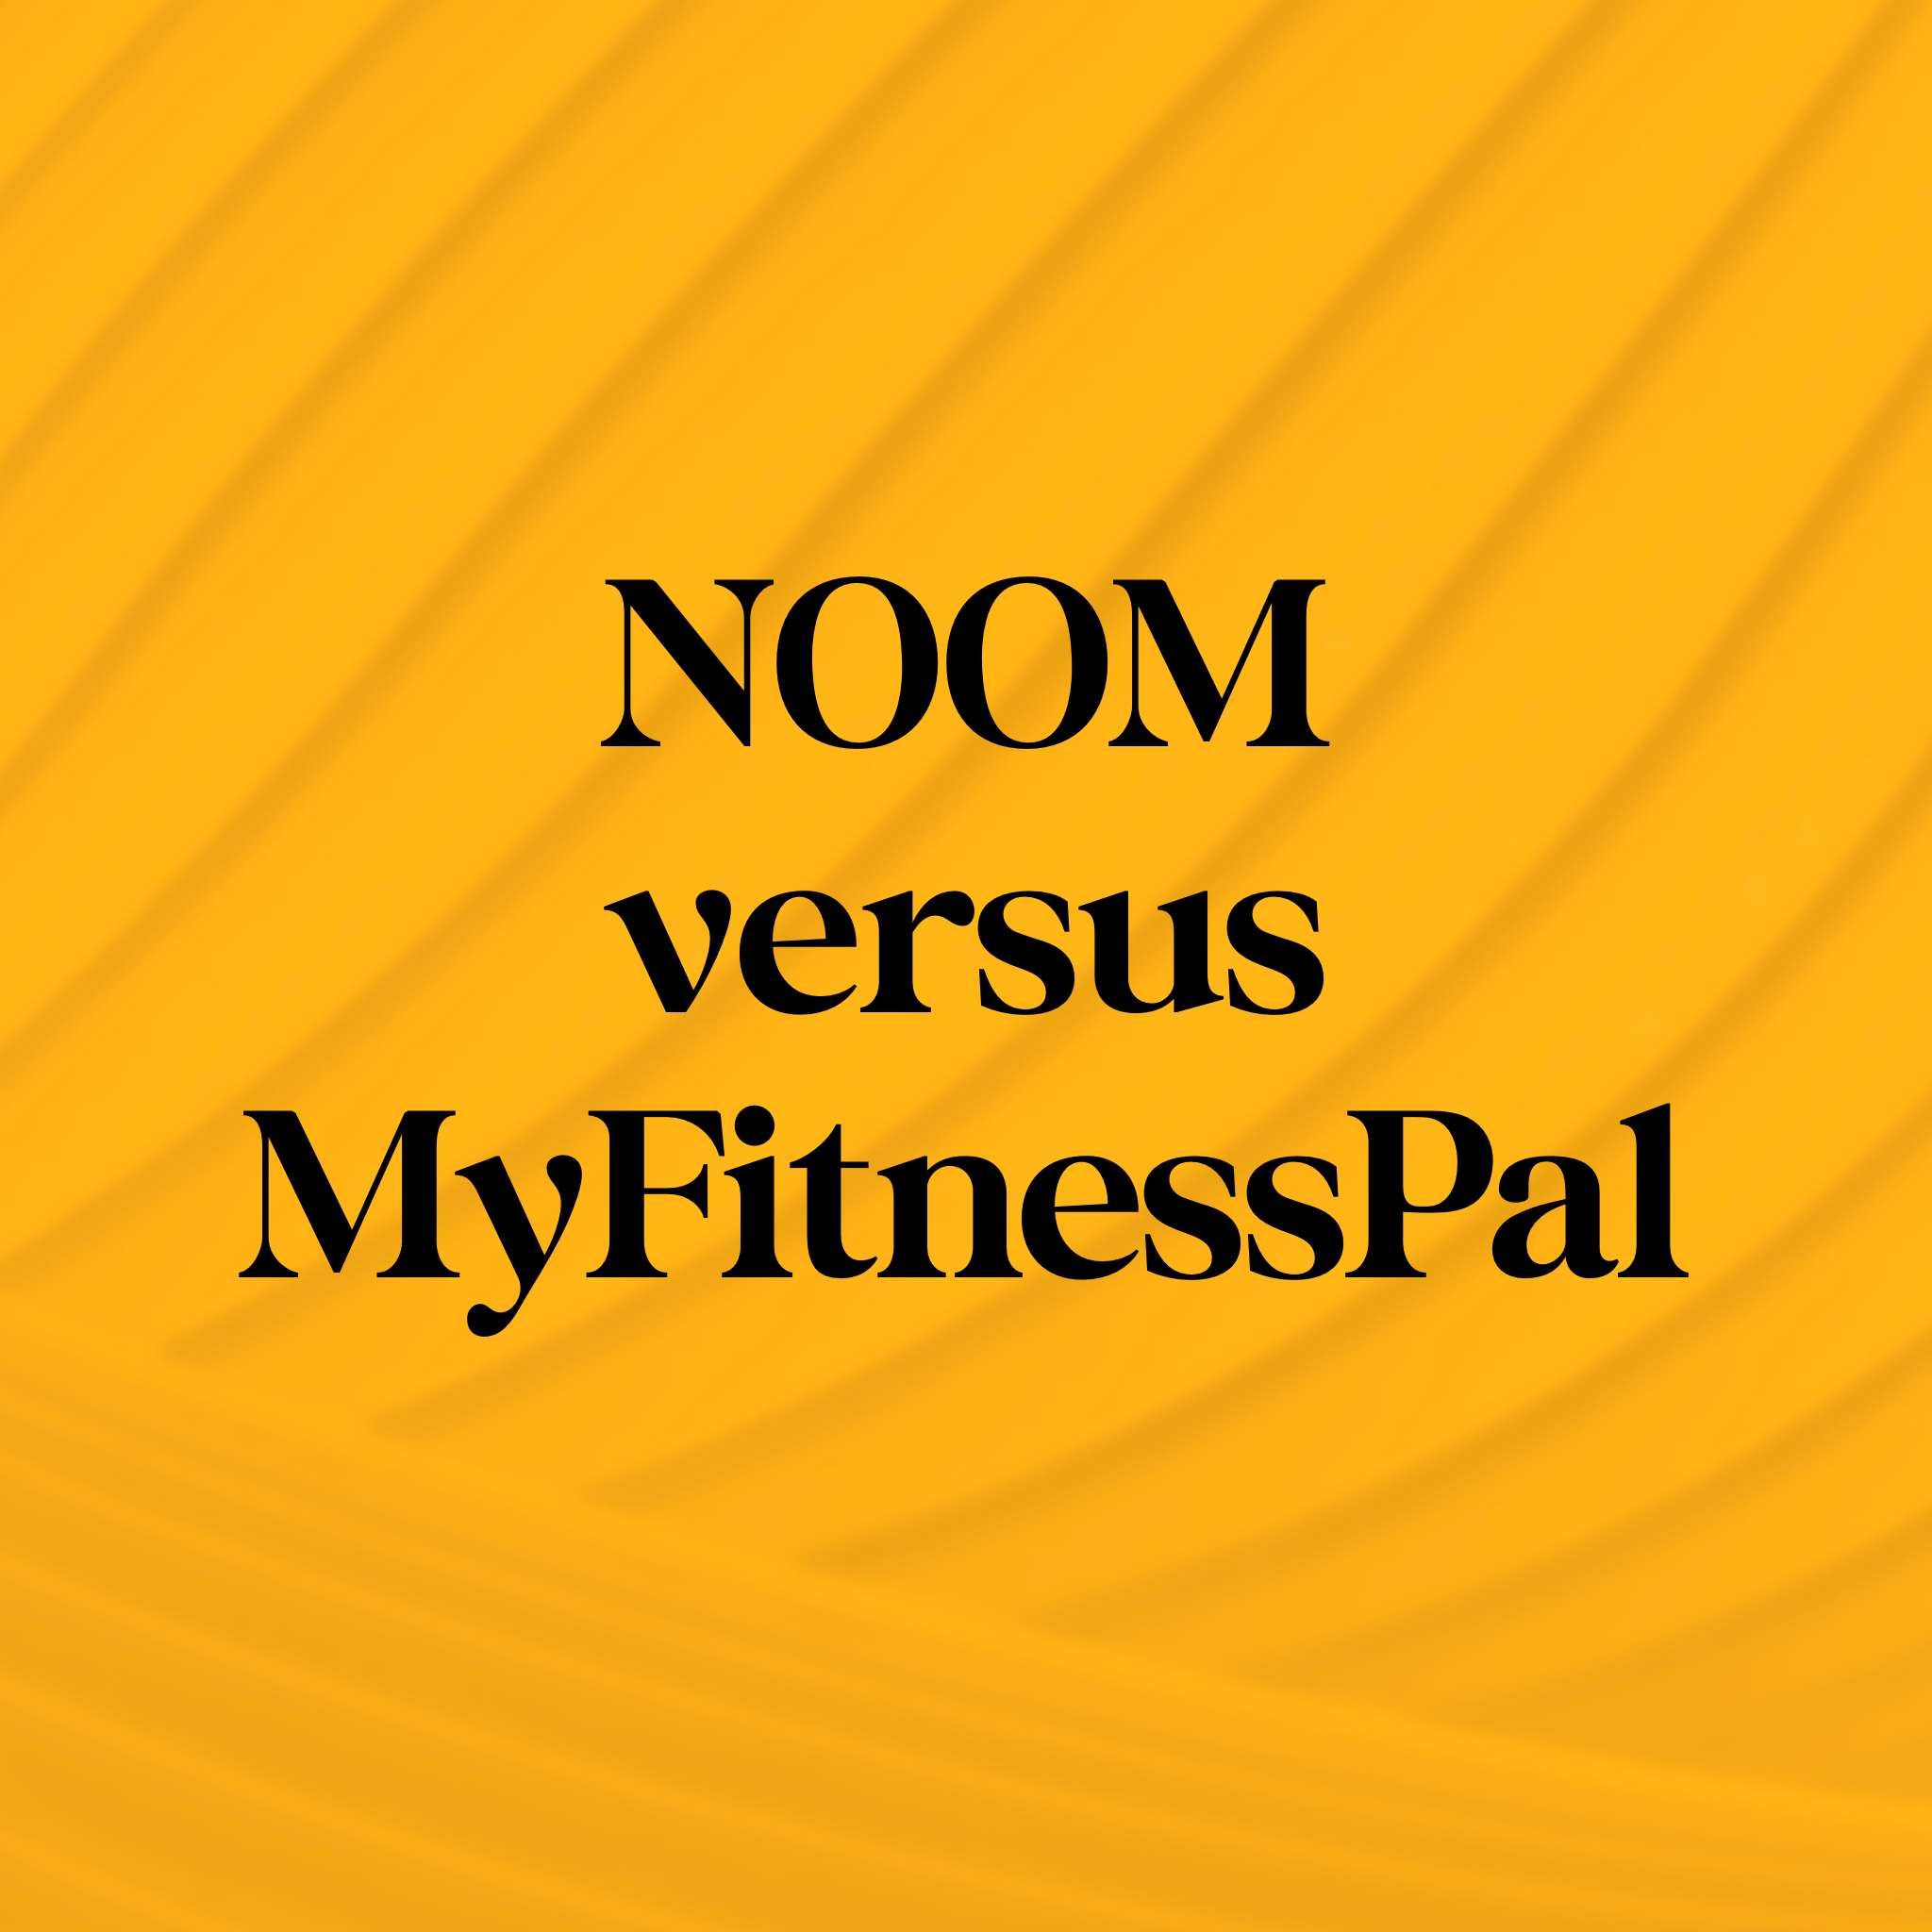 Text of Noom Versus MyFitnessPal, Image of a ladel of soup